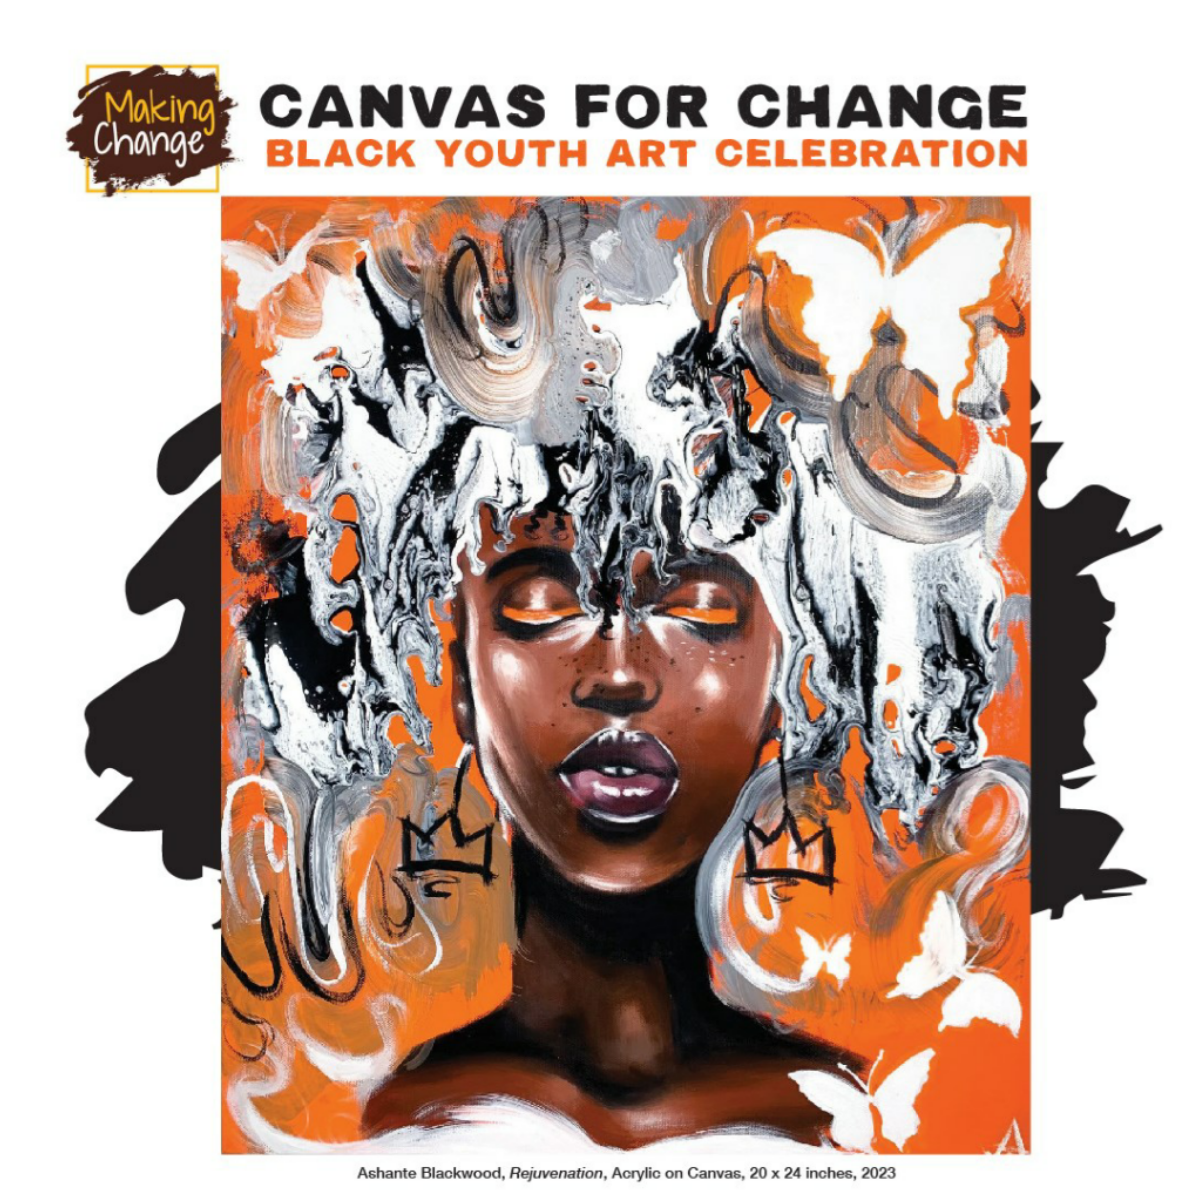 Artwork featuring the face of a Black woman with eyes closed. Text reads Making Change: Canvas for Change: Black Youth Art Celebration